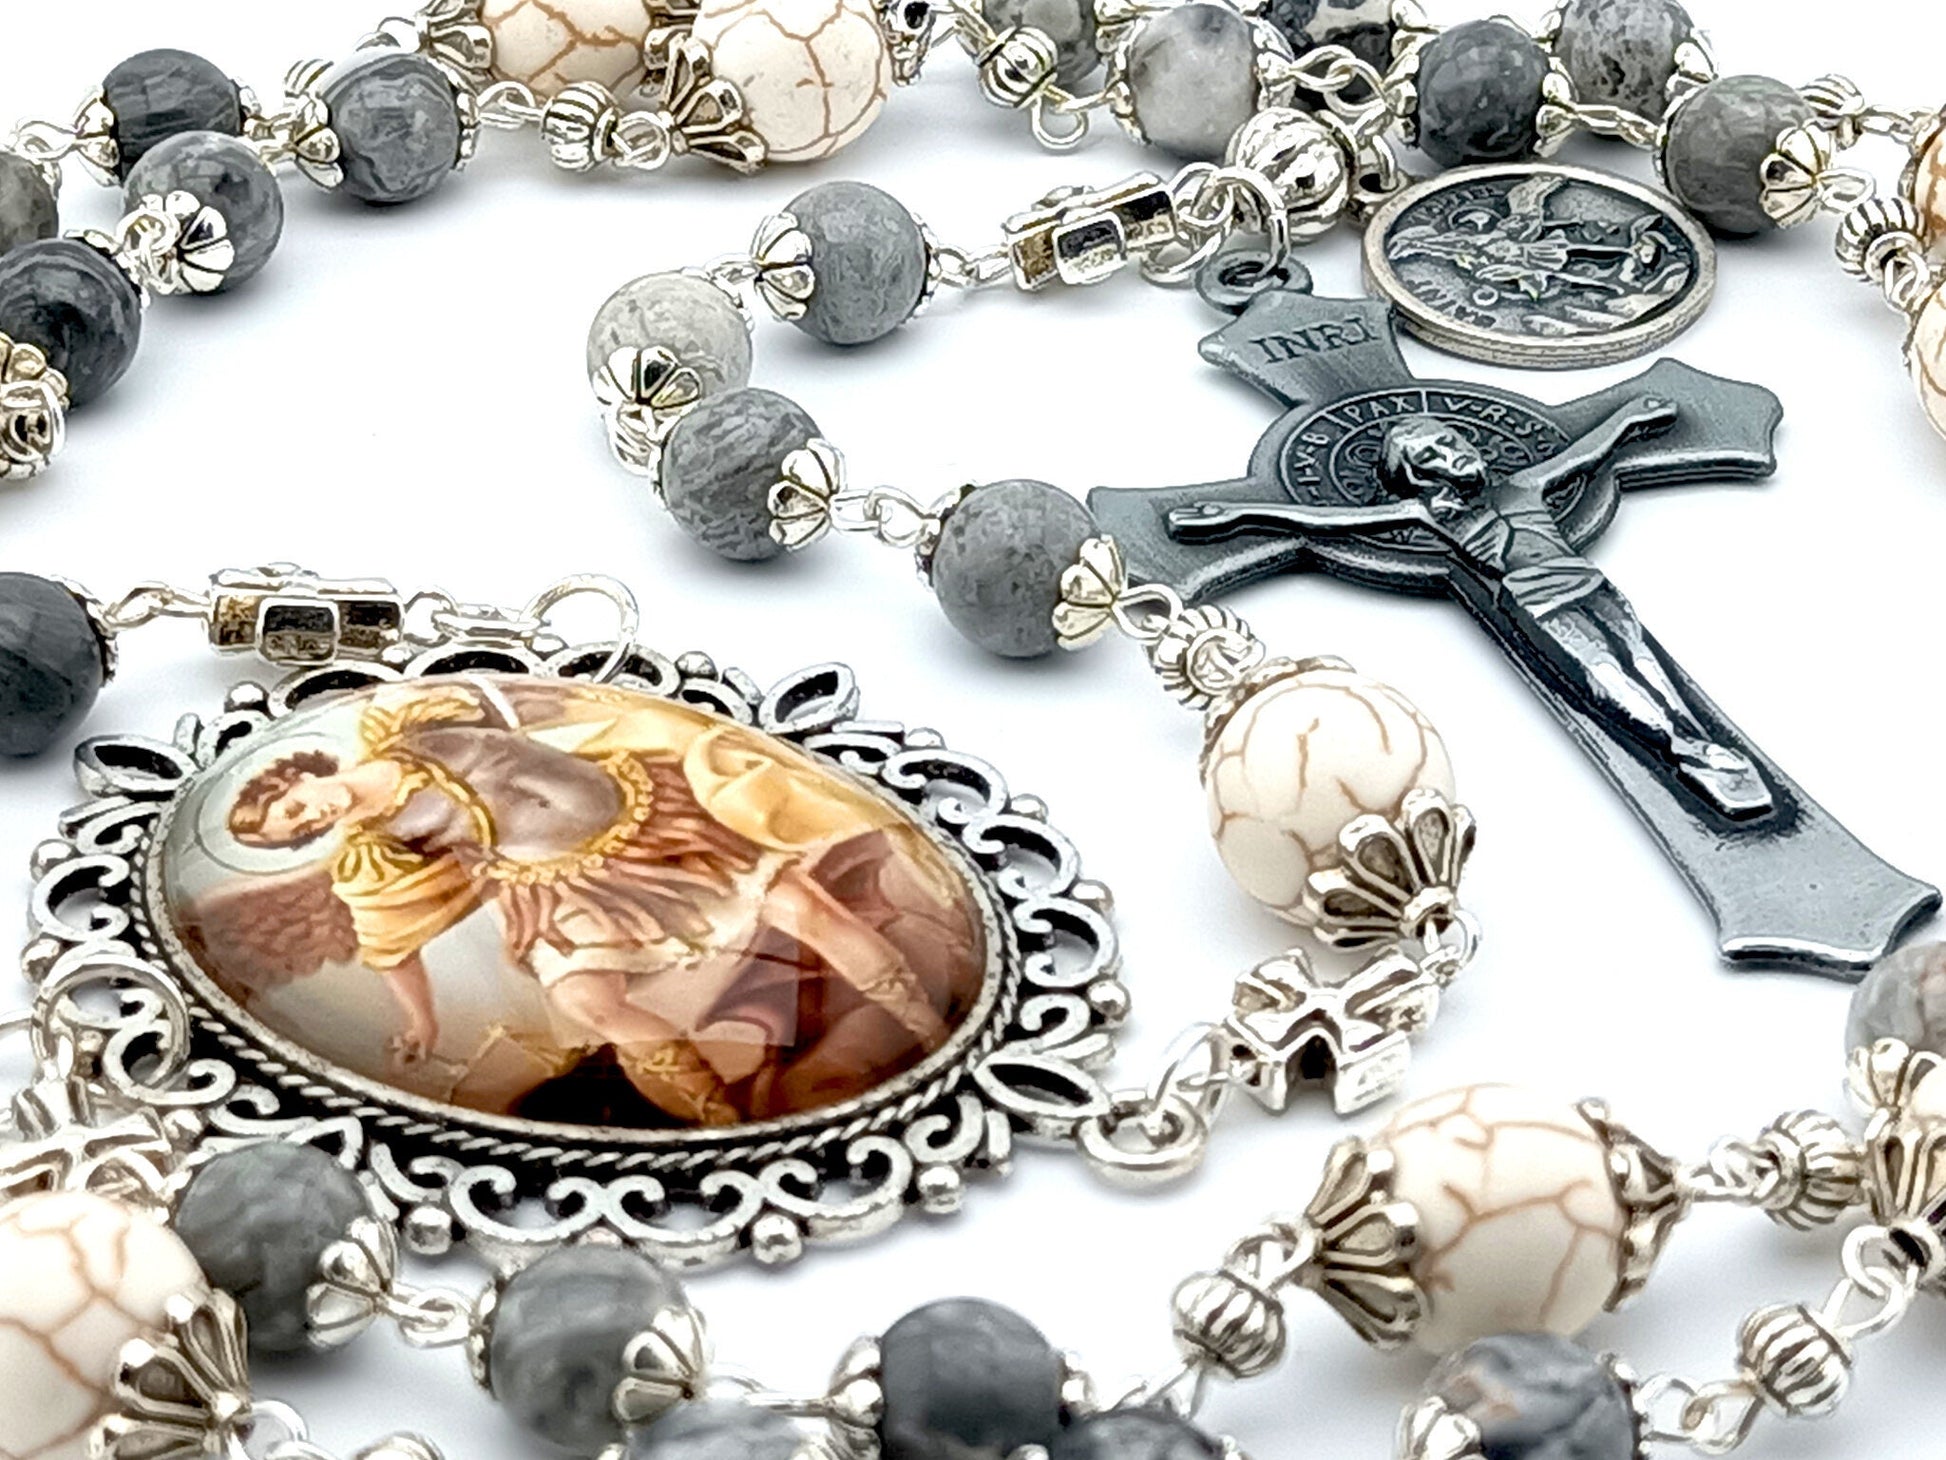 Saint Michael unique rosary beads prayer chaplet with labradorite gemstone beads, pewter crucifix and large picture centre medal.